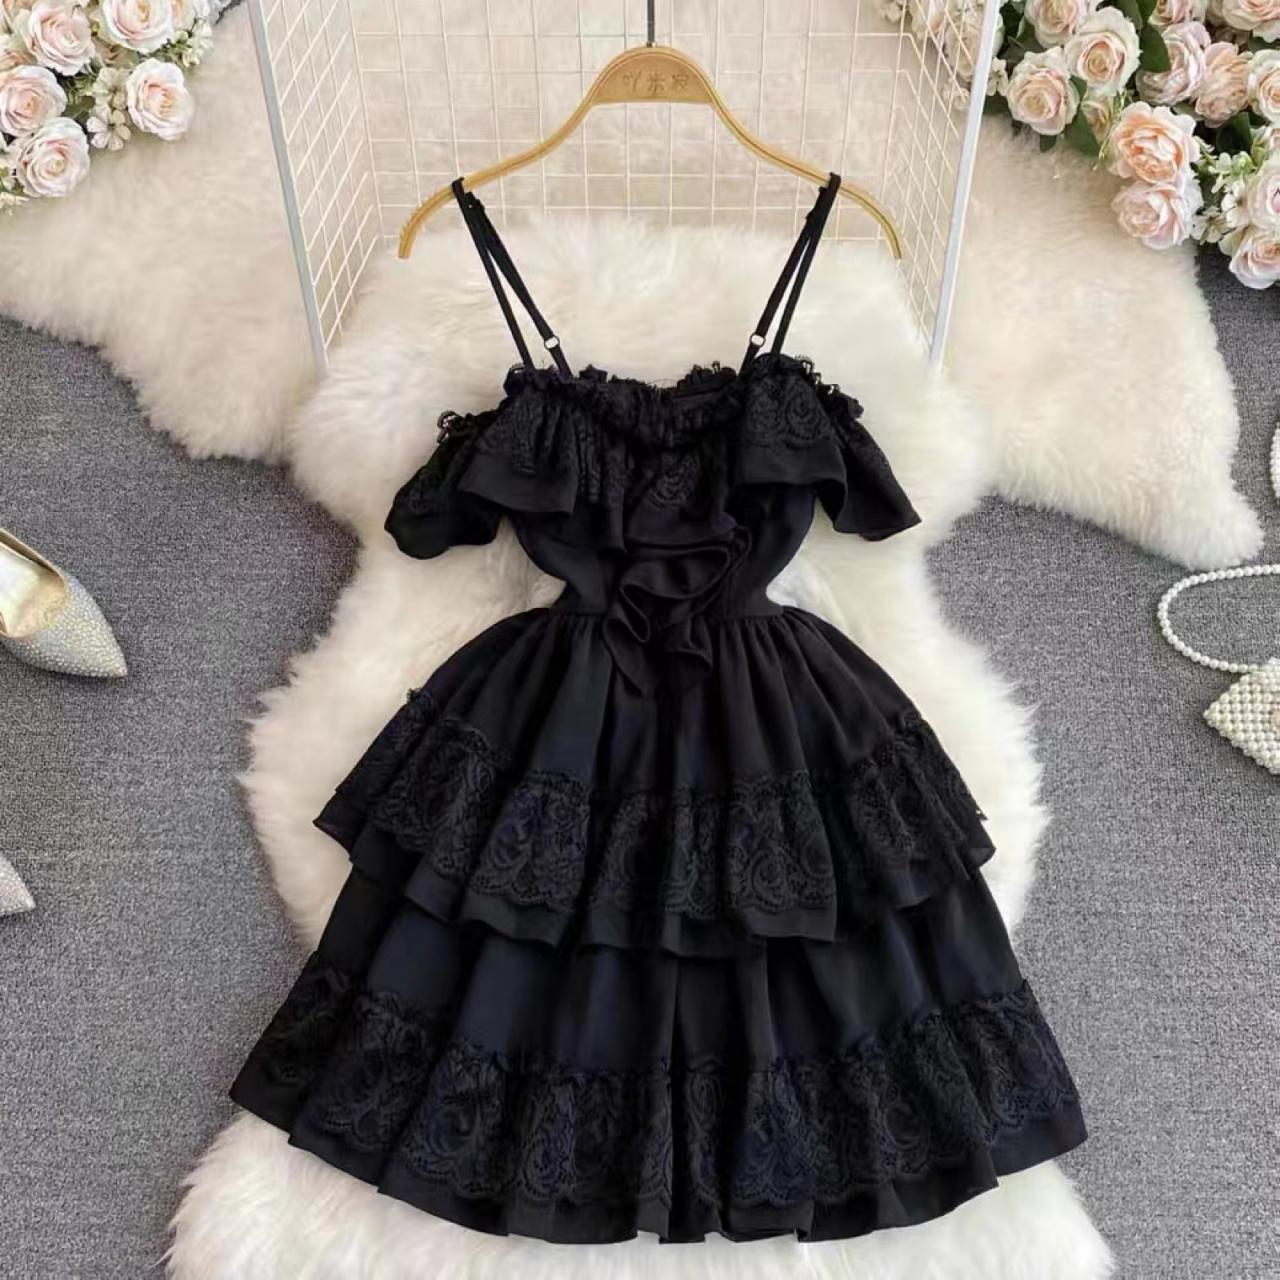 Elegant Black Ruffled Tiered Dress With Lace Detailing